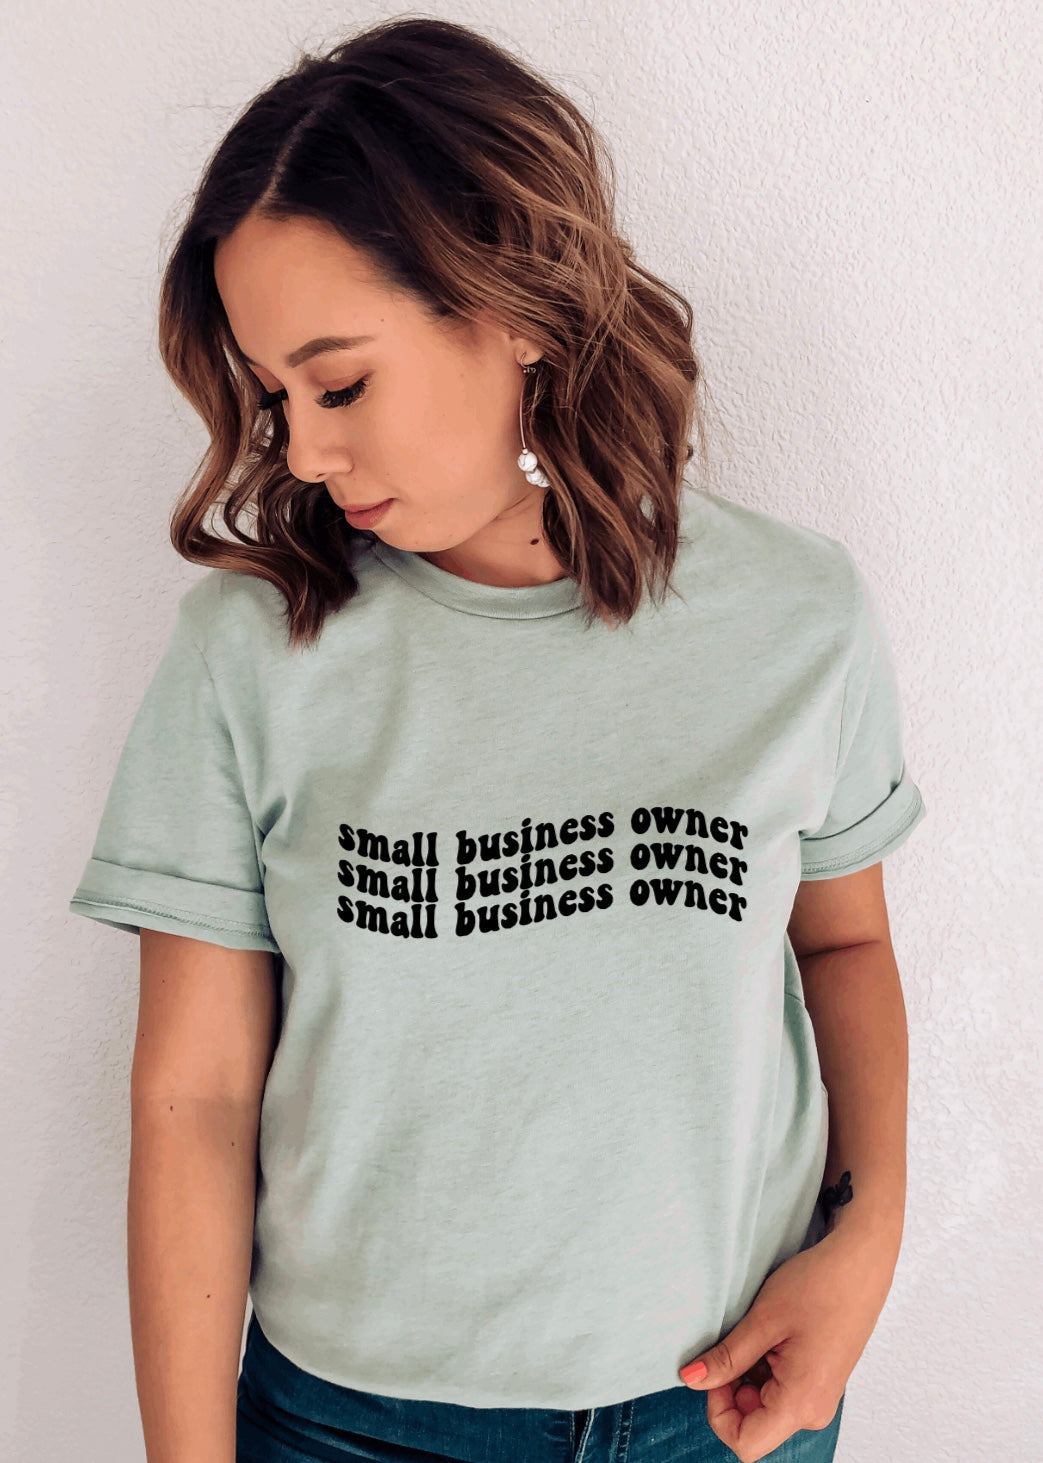 Small Business Owner- retro t-shirt